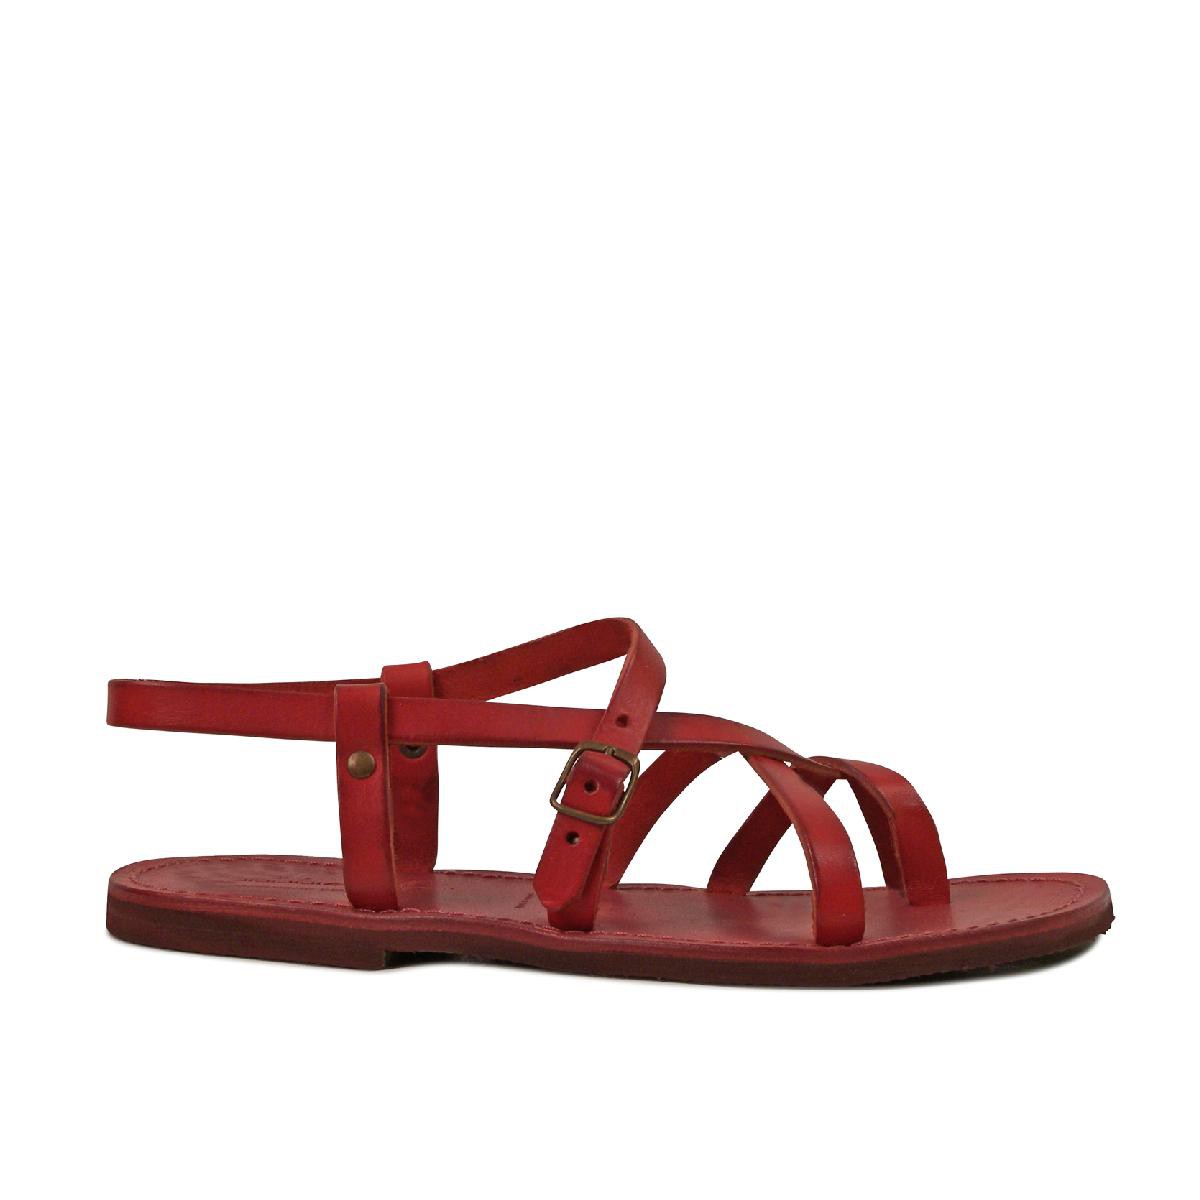 Womens red flat gladiator sandals Handmade in Italy | The leather craftsmen